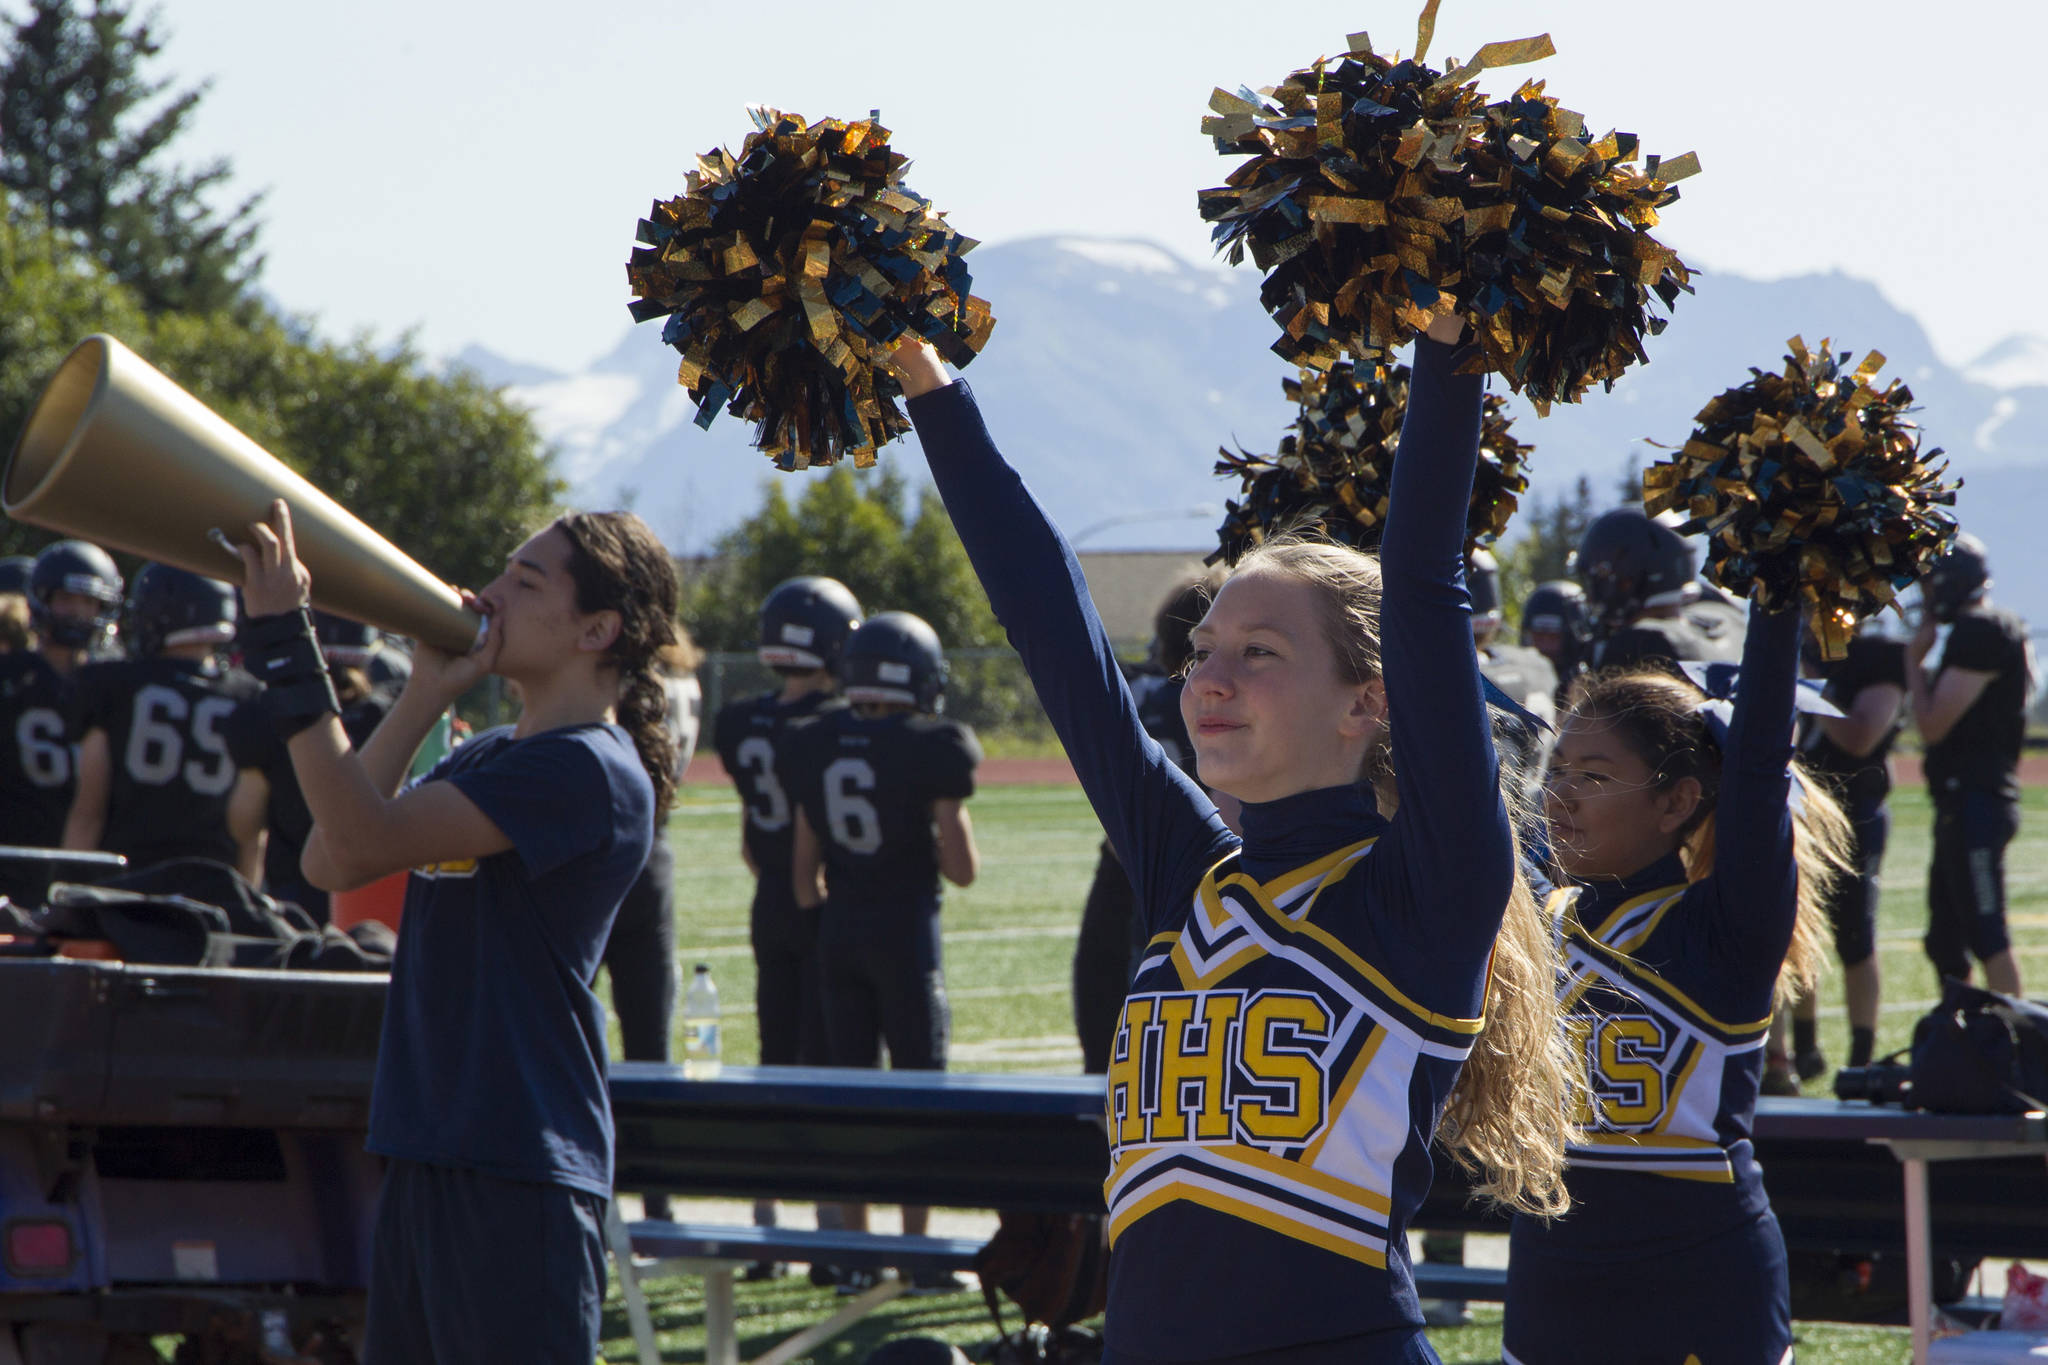 The Homer Mariner cheerleaders pep up the crowd during the Homer vs. Kodiak game Saturday, Aug. 28. The squad’s cheers could be heard by all as Homer won 34-0. (Photo by Sarah Knapp/Homer News)